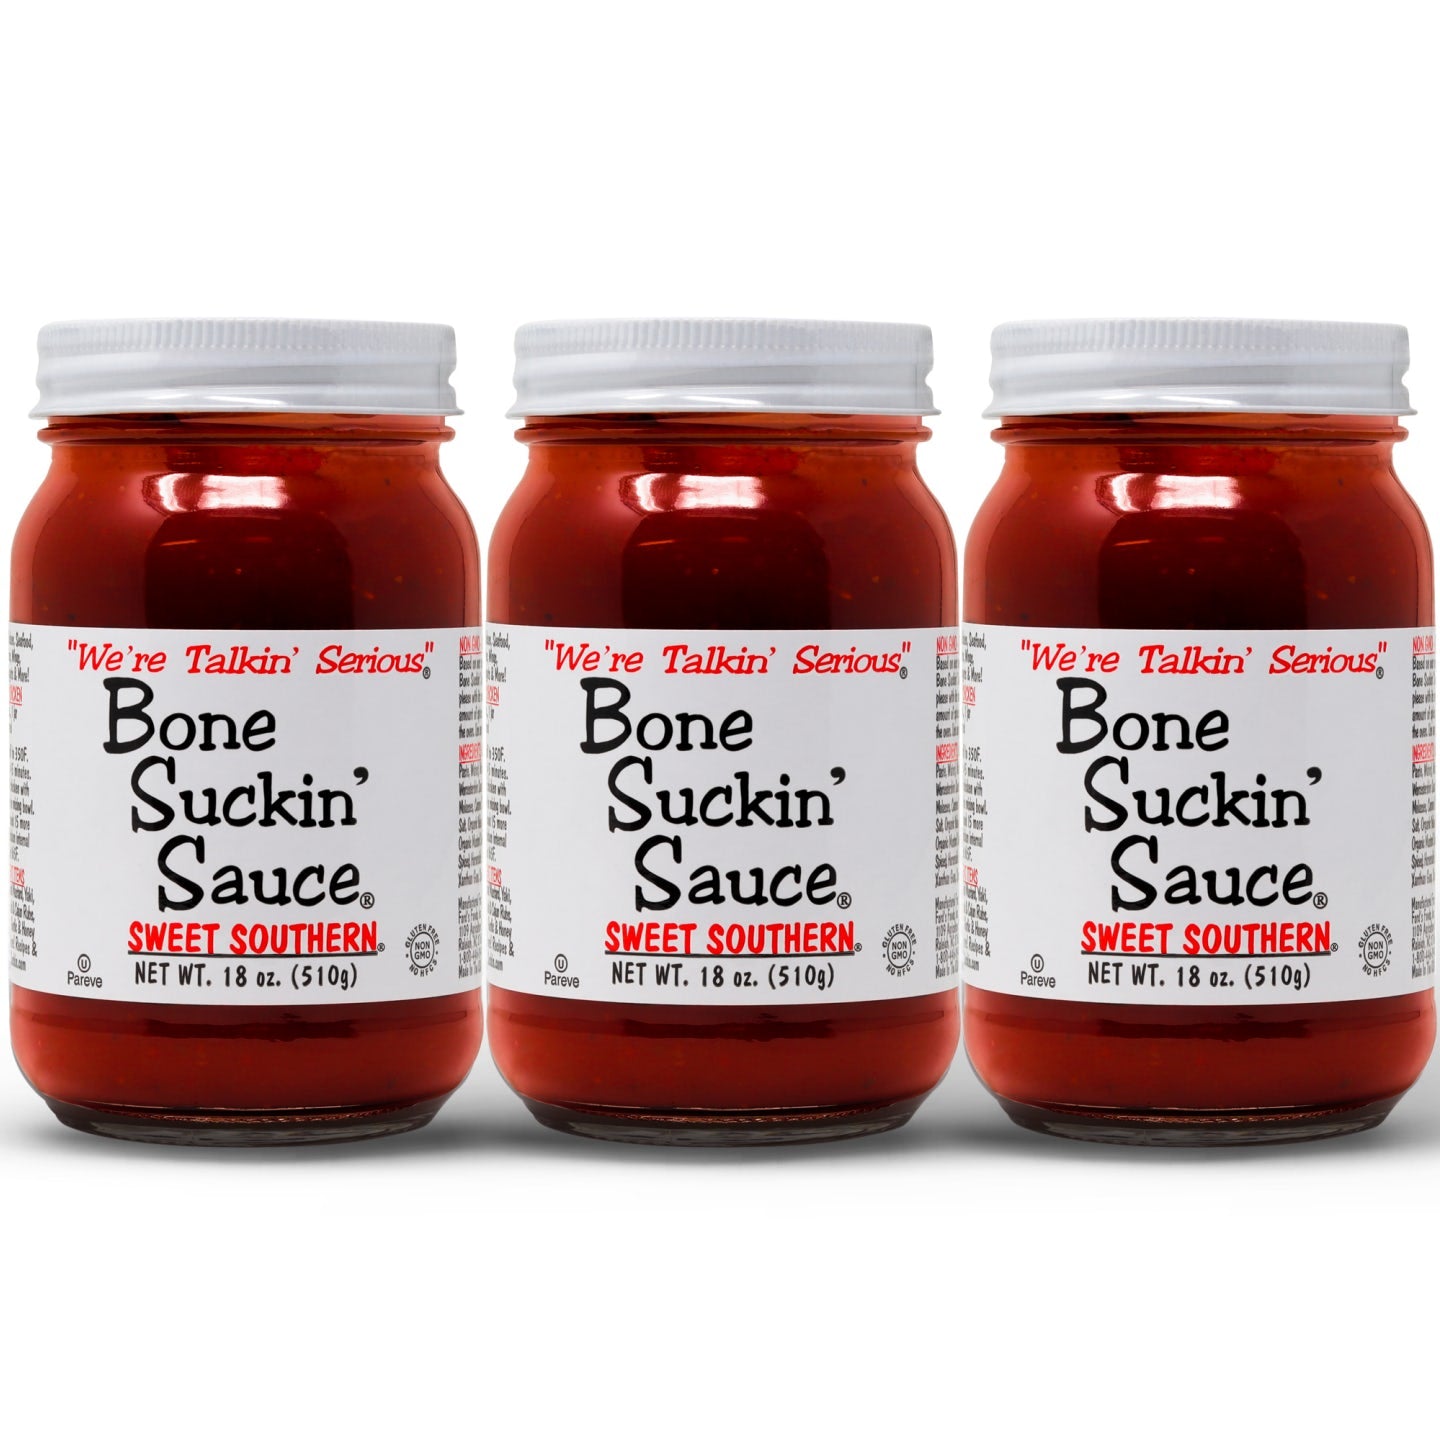 Bone Suckin Sauce® Sweet Southern®, 18 oz, 3 pack Bone Suckin' Sauce is the small batch craft barbecue sauce that is 3rd party tested & verified, Made in the USA in glass bottles, beloved by the entire family for its delicuous taste and unmatched versatility. This exceptional sauce is Non-GMO, Gluten-Free, Kosher and has No High Fructose Corn Syrup, offering both health-consciousness and unparalleled taste and quality.